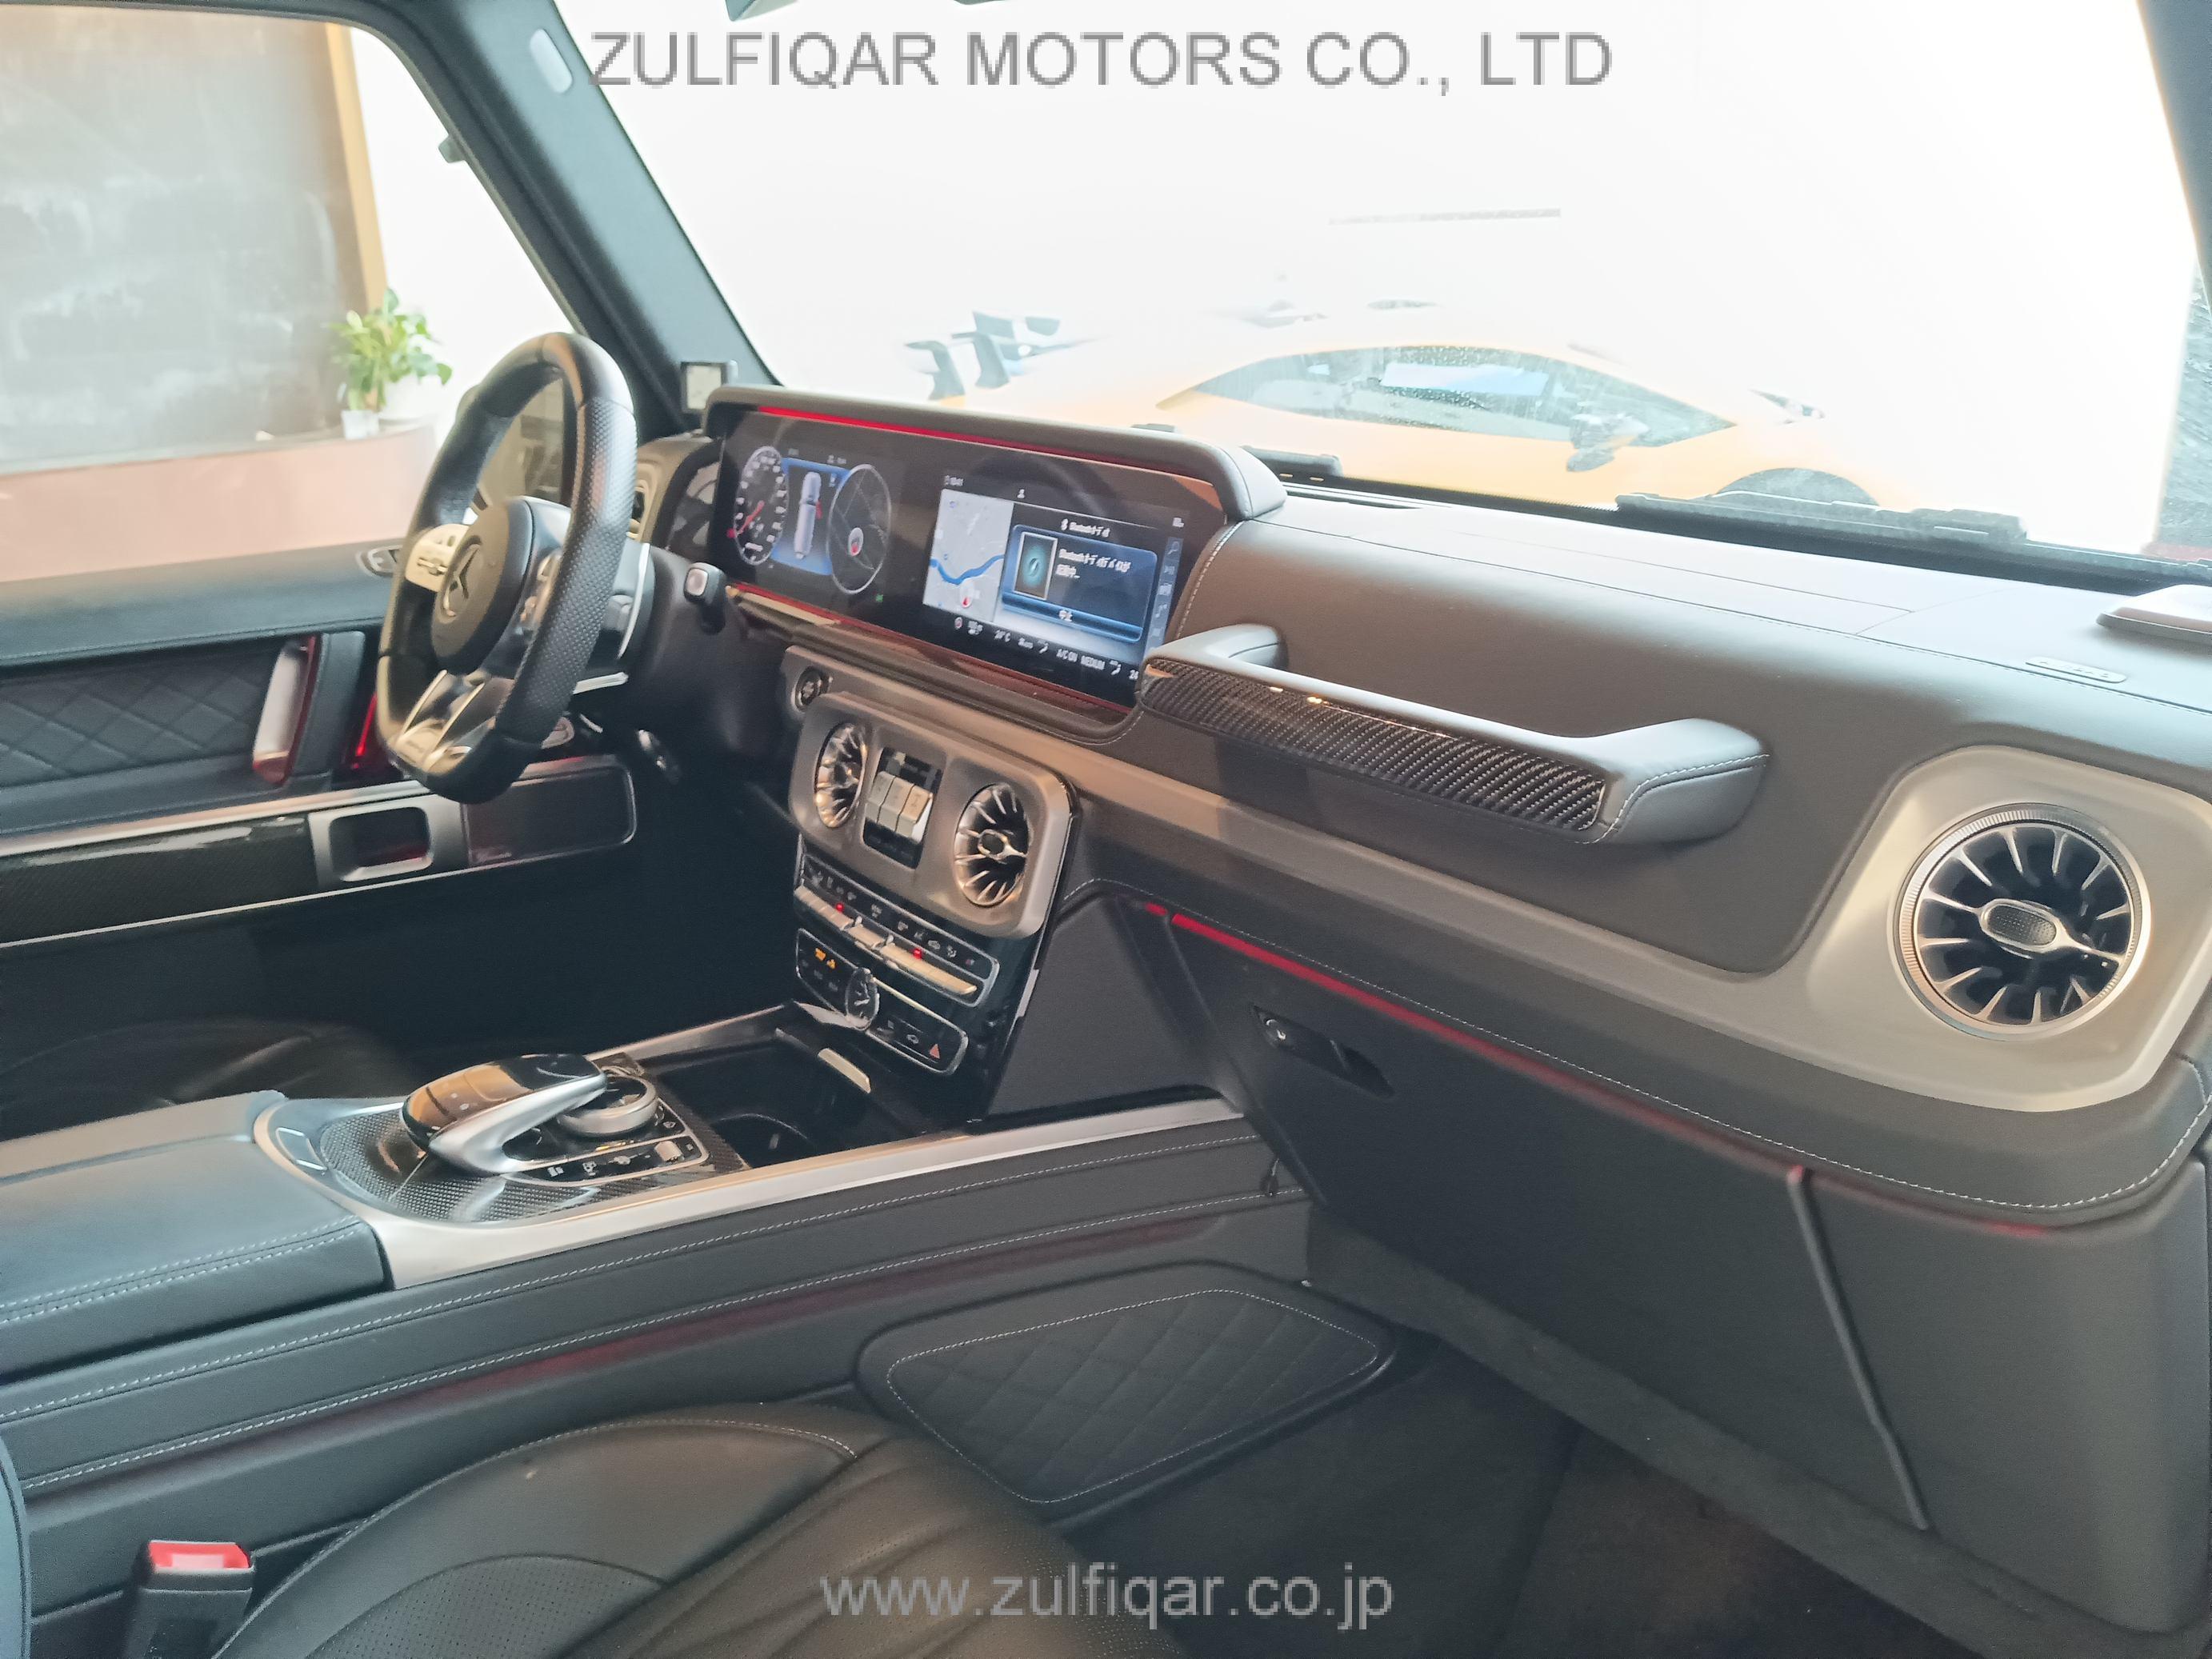 MERCEDES AMG G CLASS 2019 Image 60